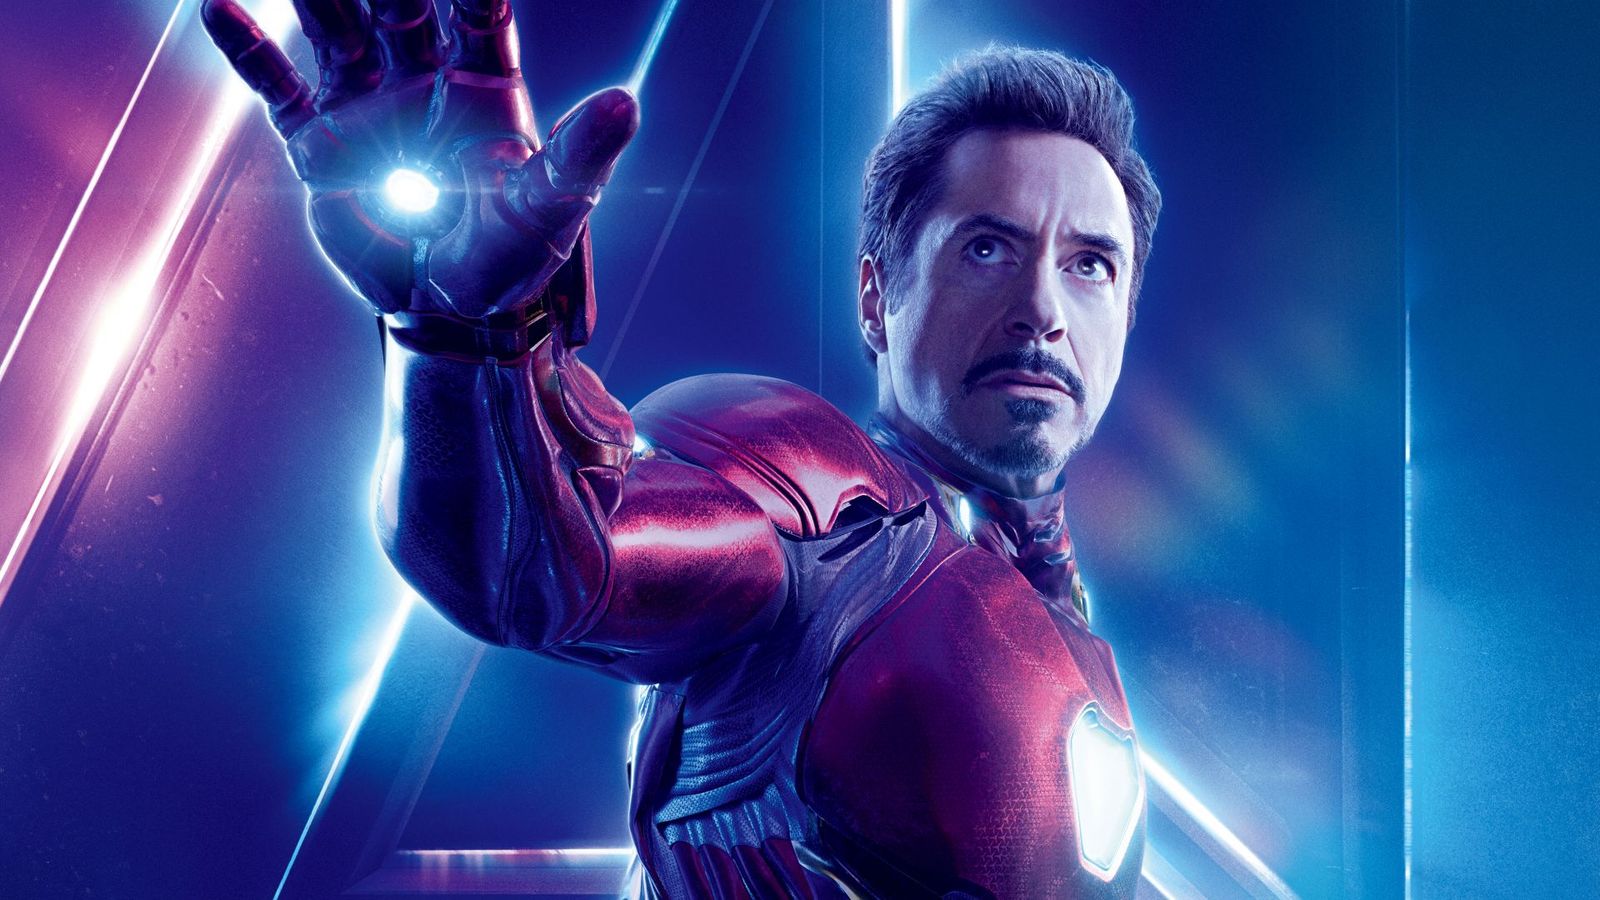 "It'd Either Be Great Or The Biggest Dumpster Fire Ever": Kevin Feige On Casting Robert Downey jr As Iron Man